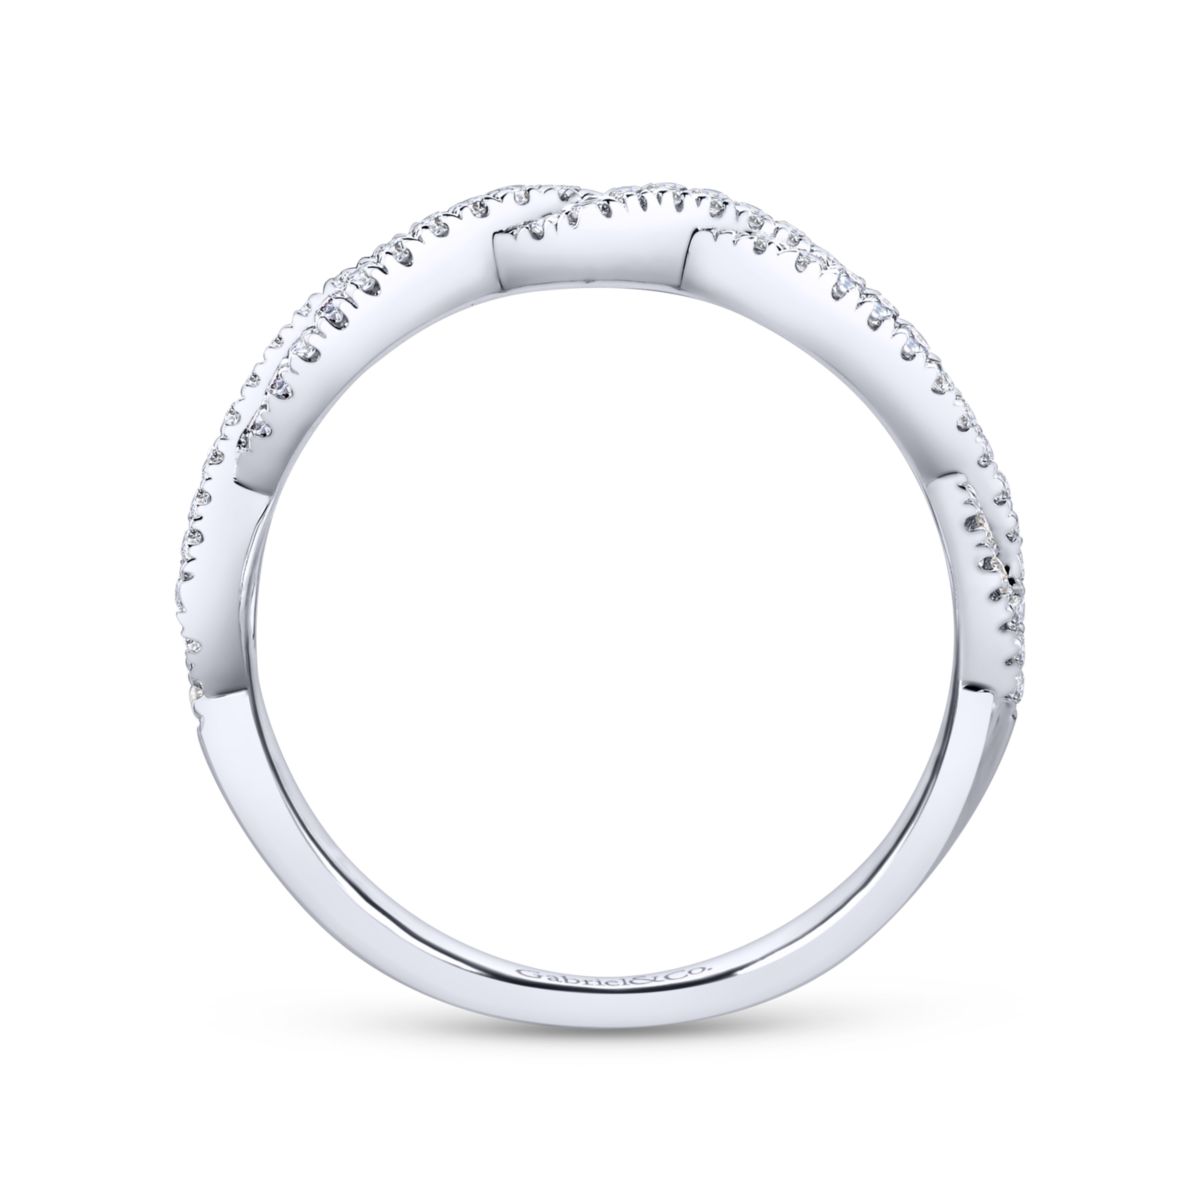 Gabriel Twisted Diamond Stackable Ring in 14kt White Gold (1/5ct tw)